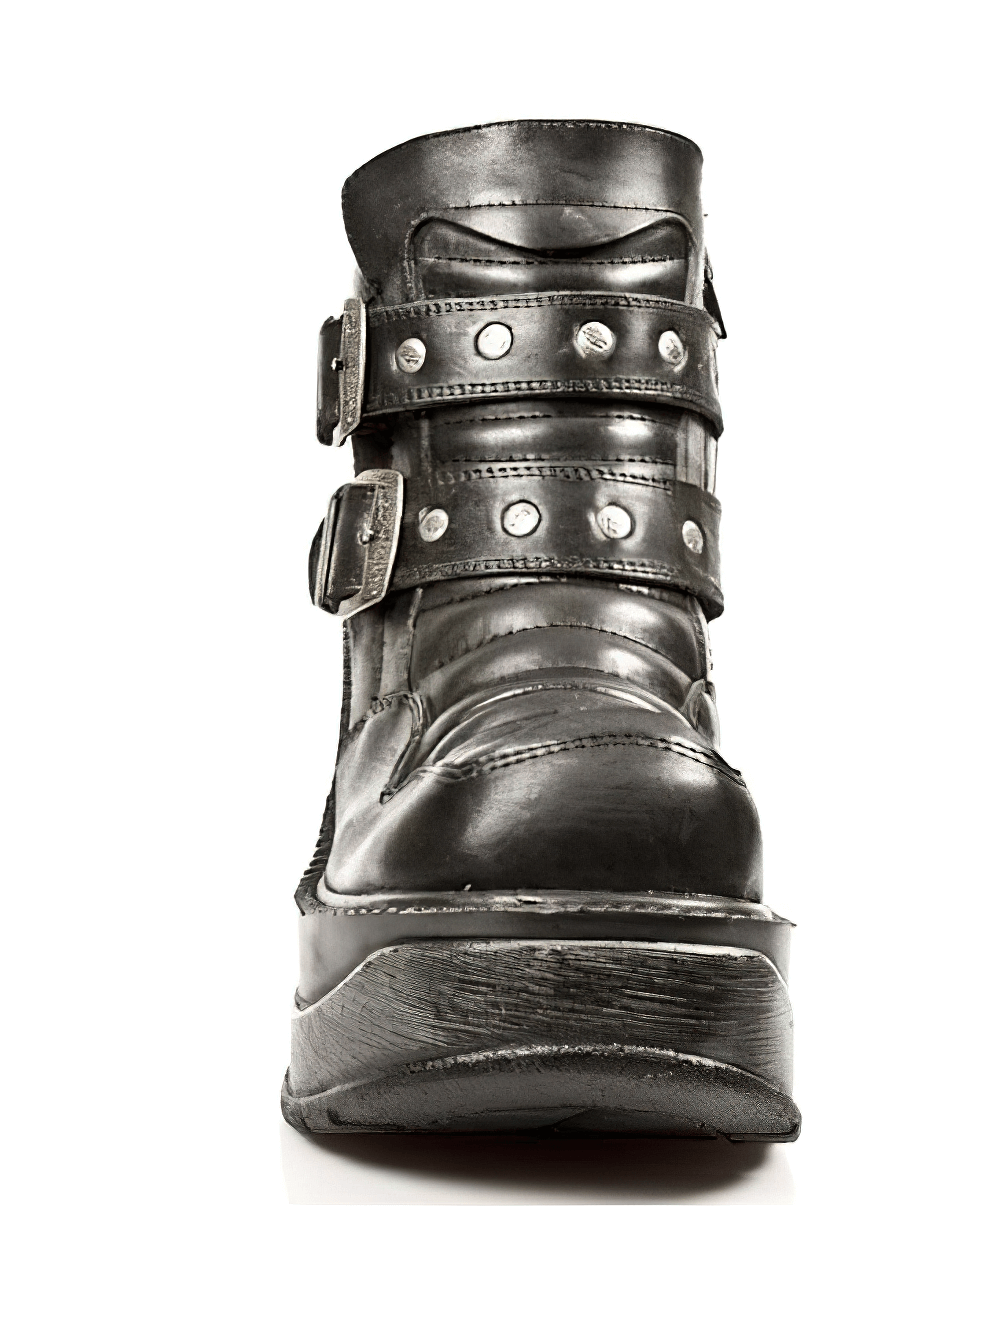 NEW ROCK Gothic Platform Buckle Boots with Metal Details